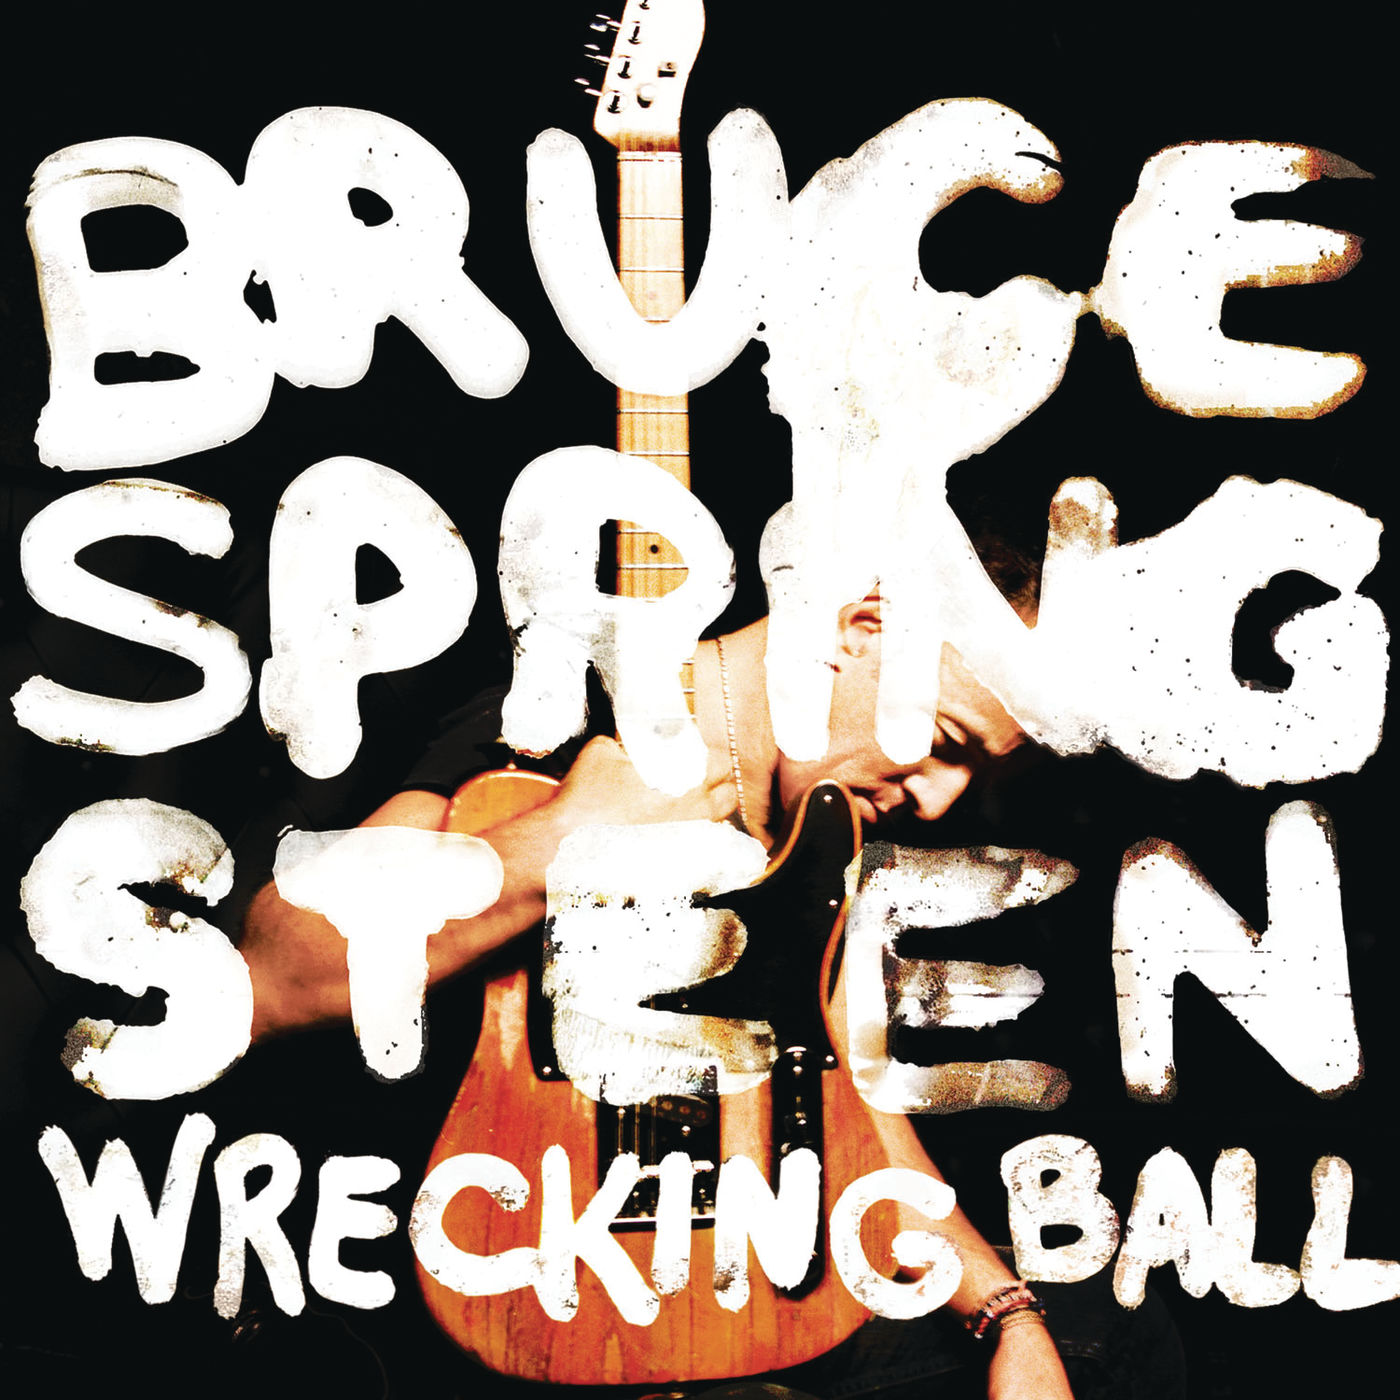 Bruce Springsteen – Wrecking Ball (Special Edition) (2012/2020) [FLAC 24bit/44,1kHz]